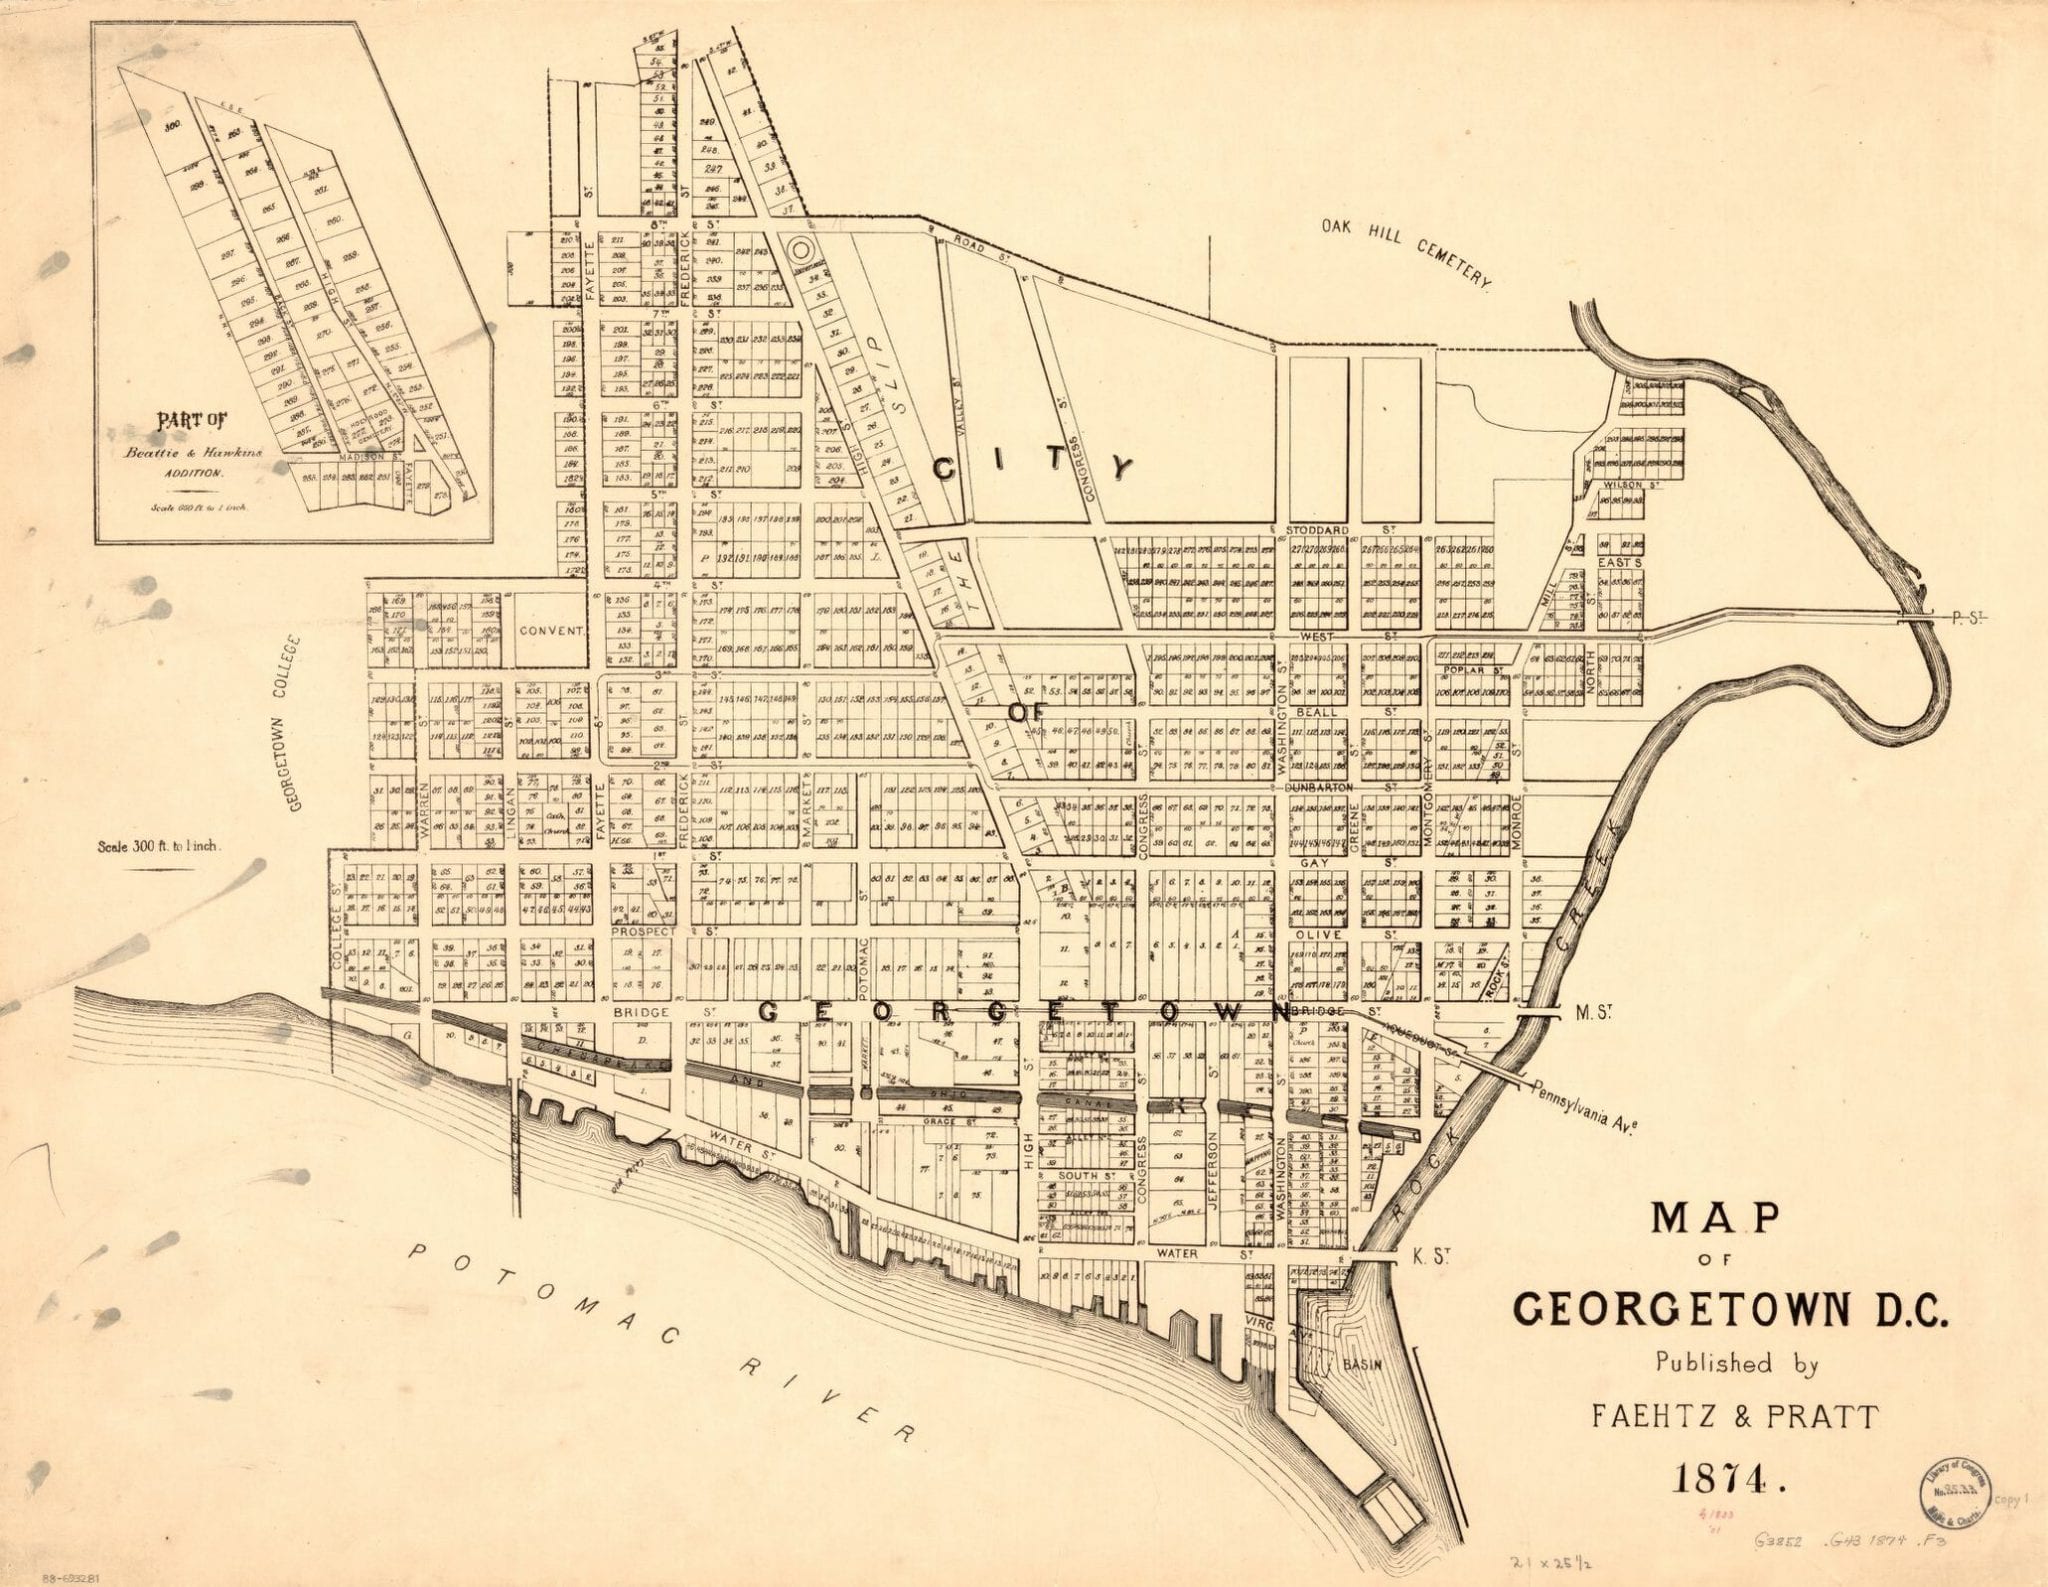 A Detailed Look At The Georgetown Map From The Library Of Congress